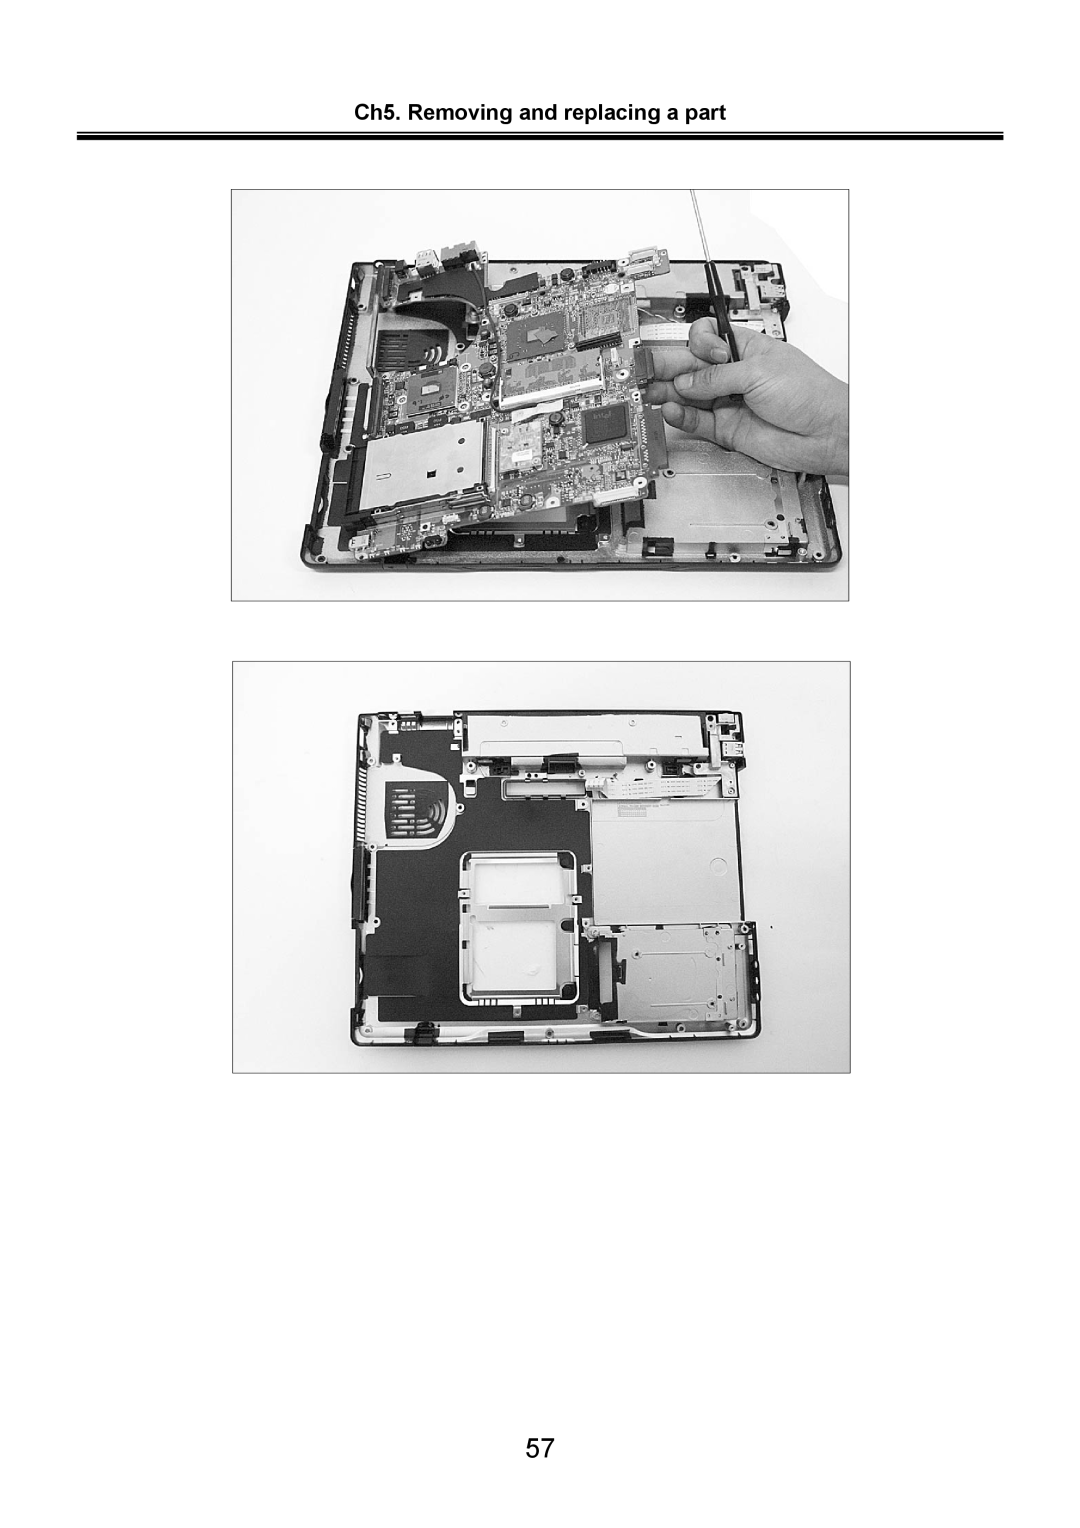 LG Electronics LS70 service manual Ch5. Removing and replacing a part 